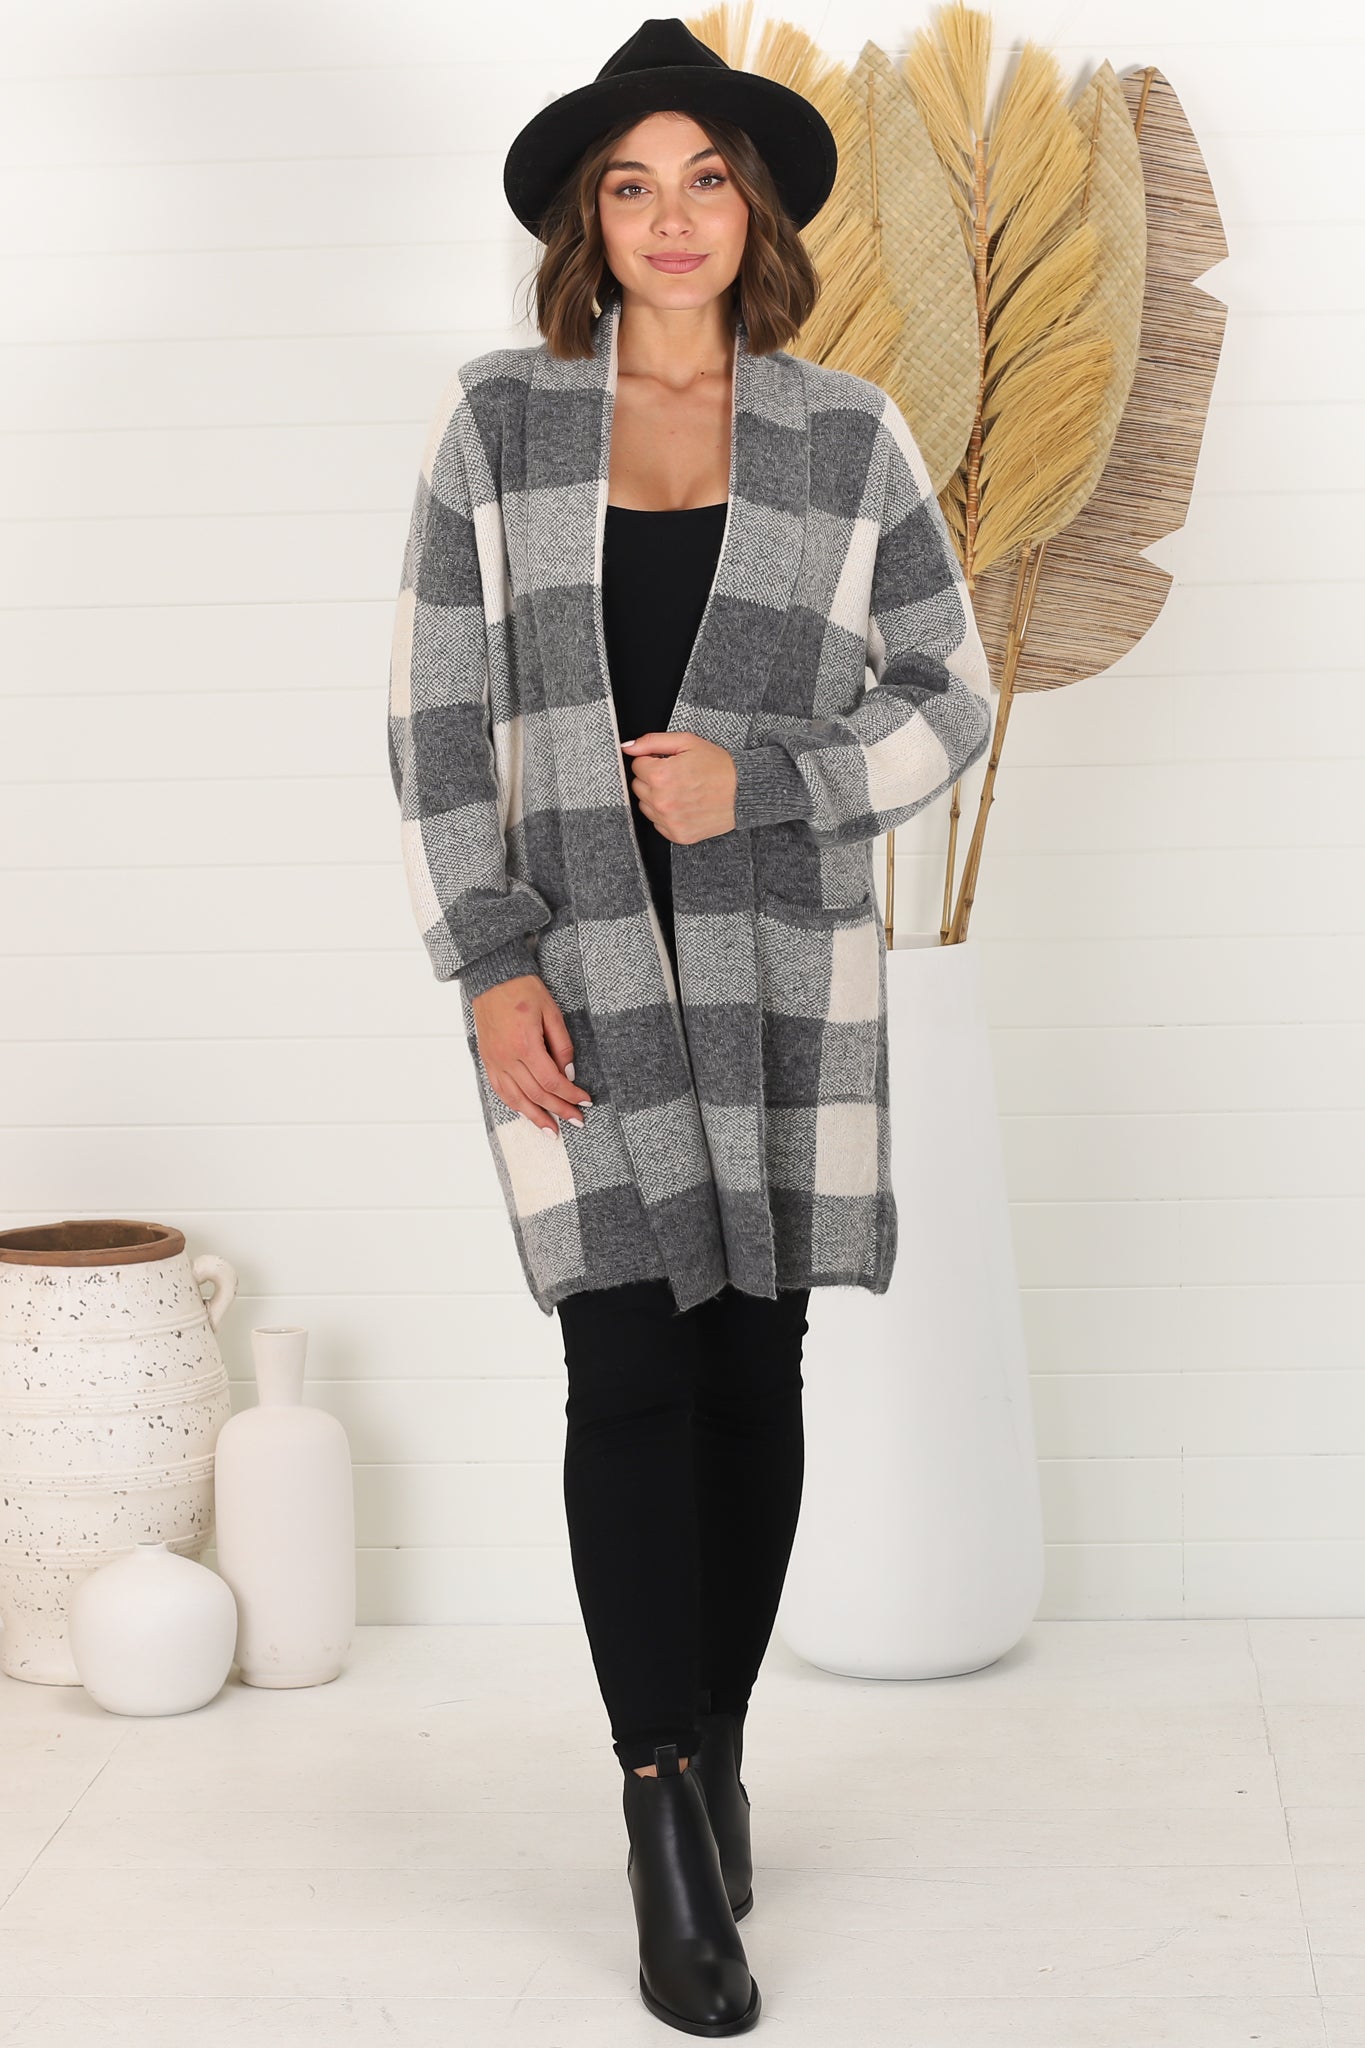 Adelen Cardigan - Folded Center Front Checkered Cardigan in Grey